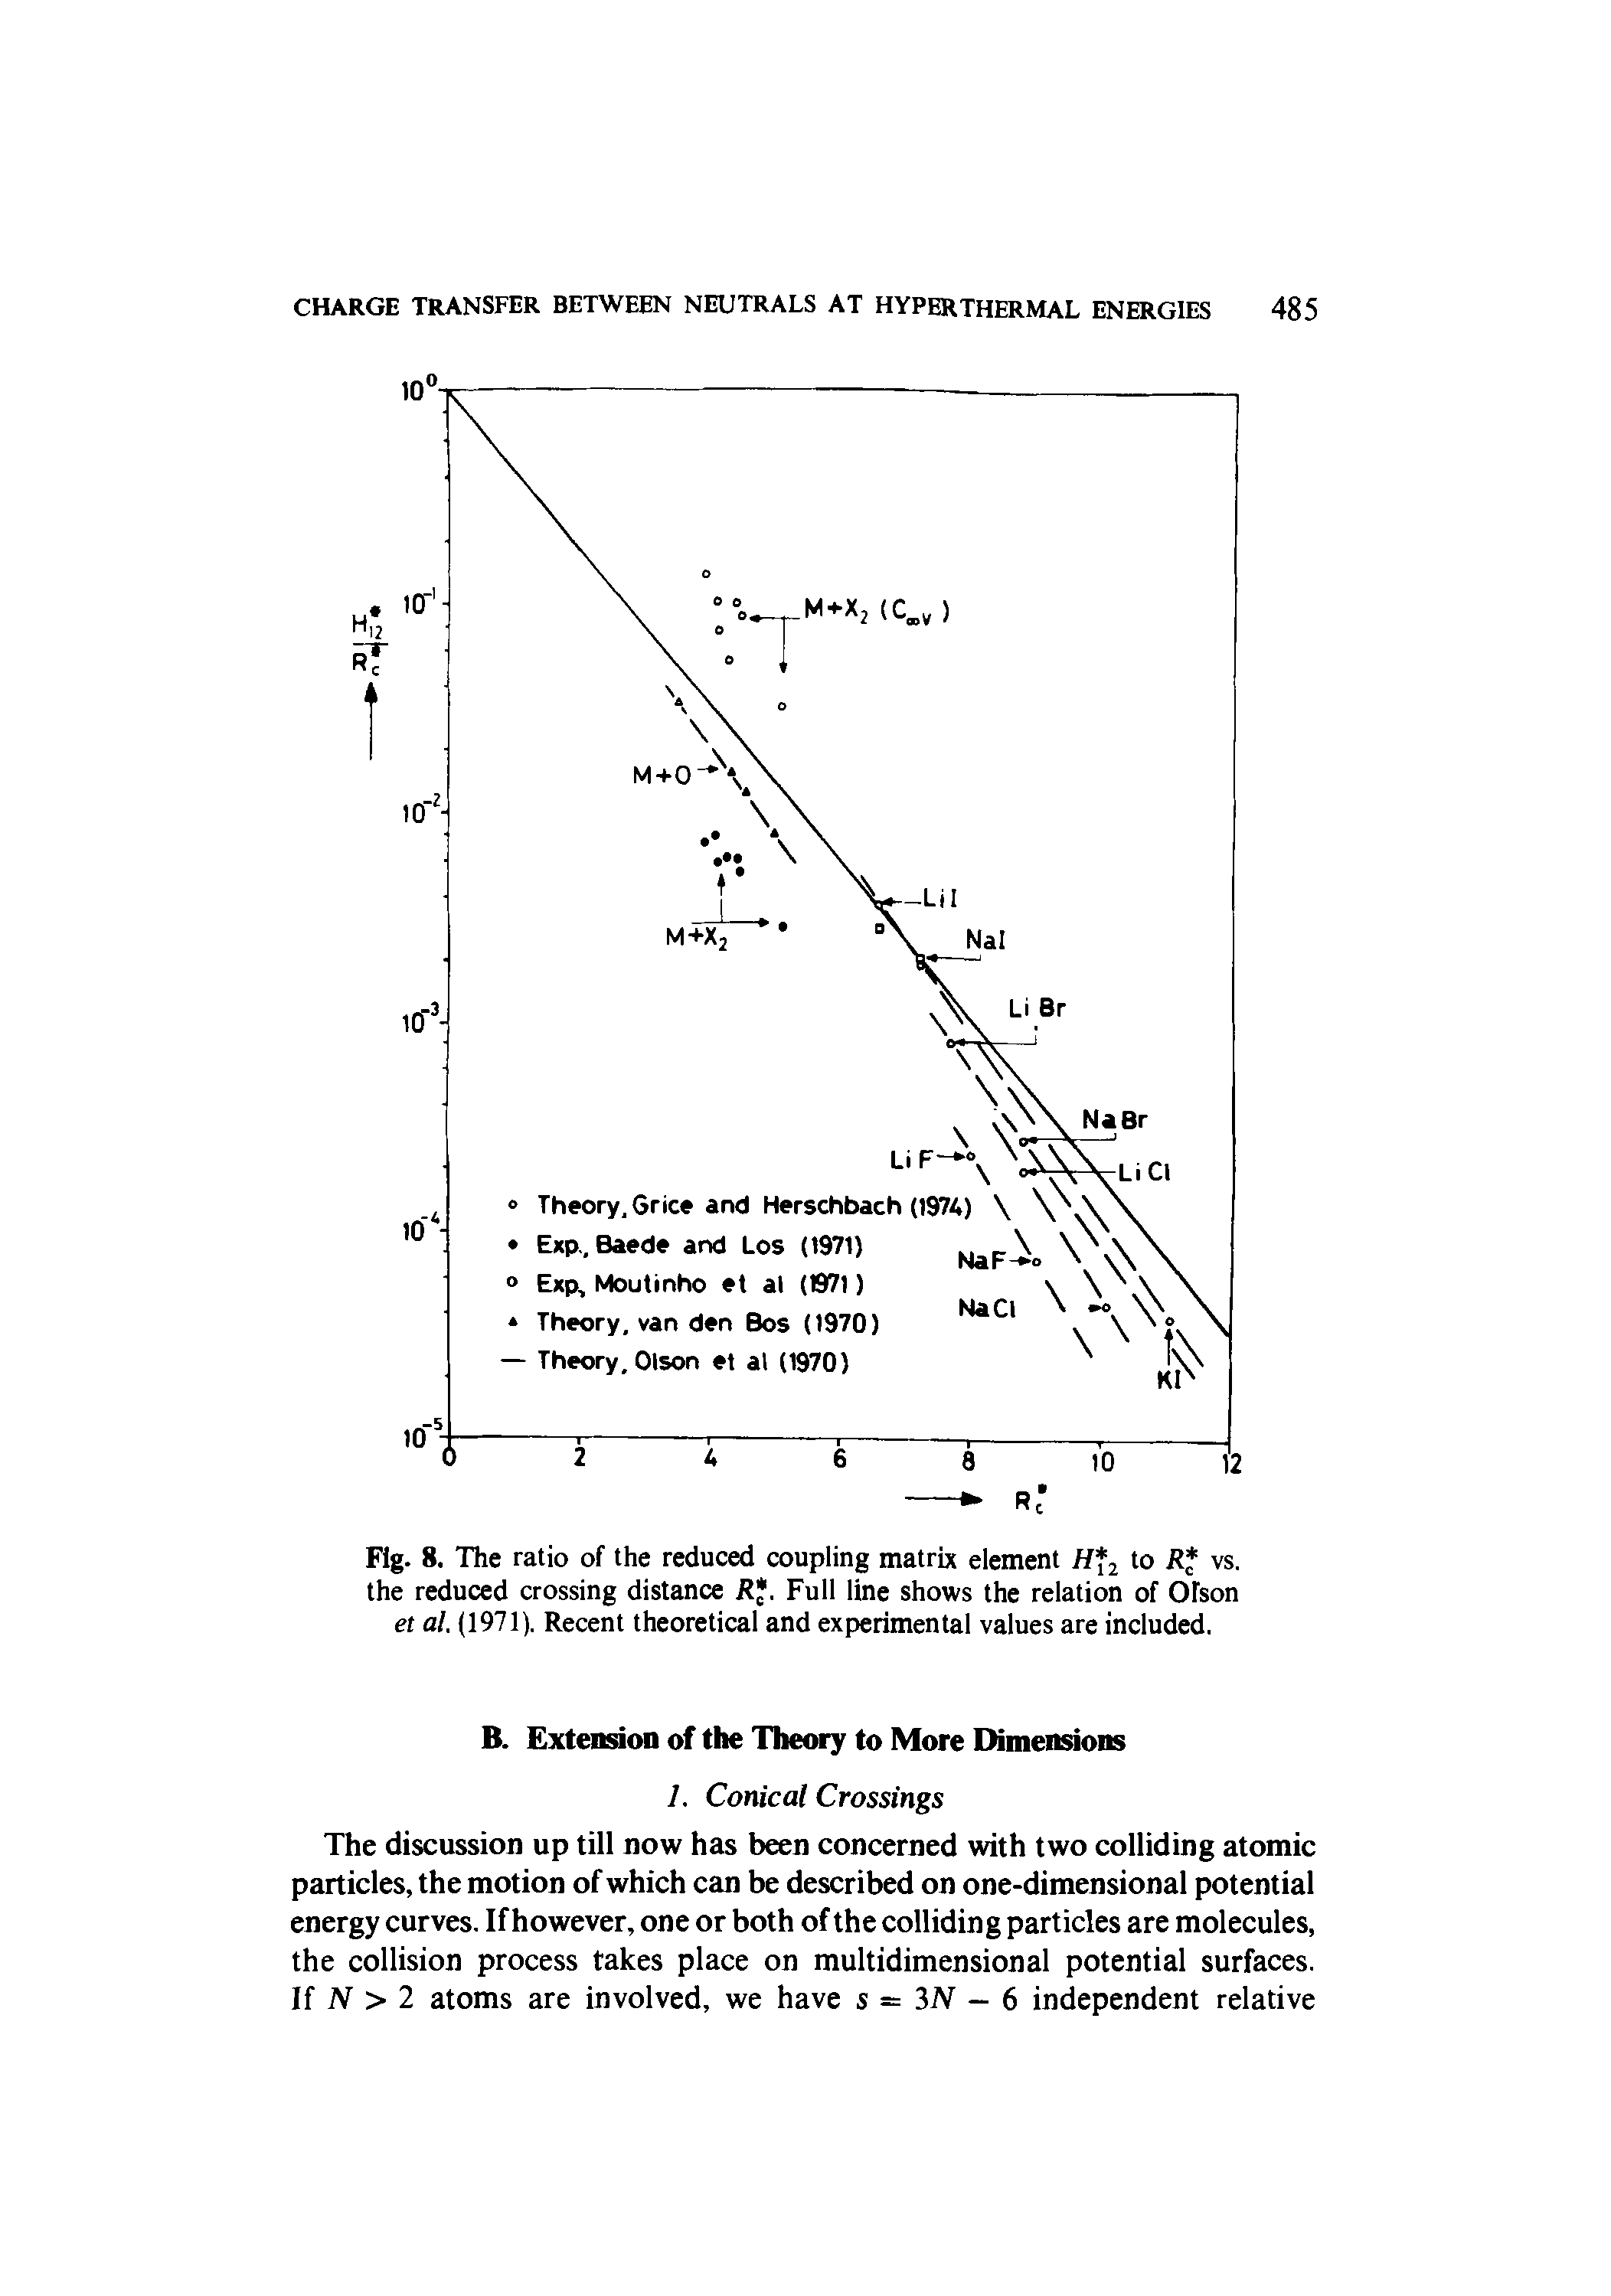 Fig. 8. The ratio of the reduced coupling matrix element // 2 to R vs. the reduced crossing distance R. Full line shows the relation of Olson et al. (1971). Recent theoretical and experimental values are included.